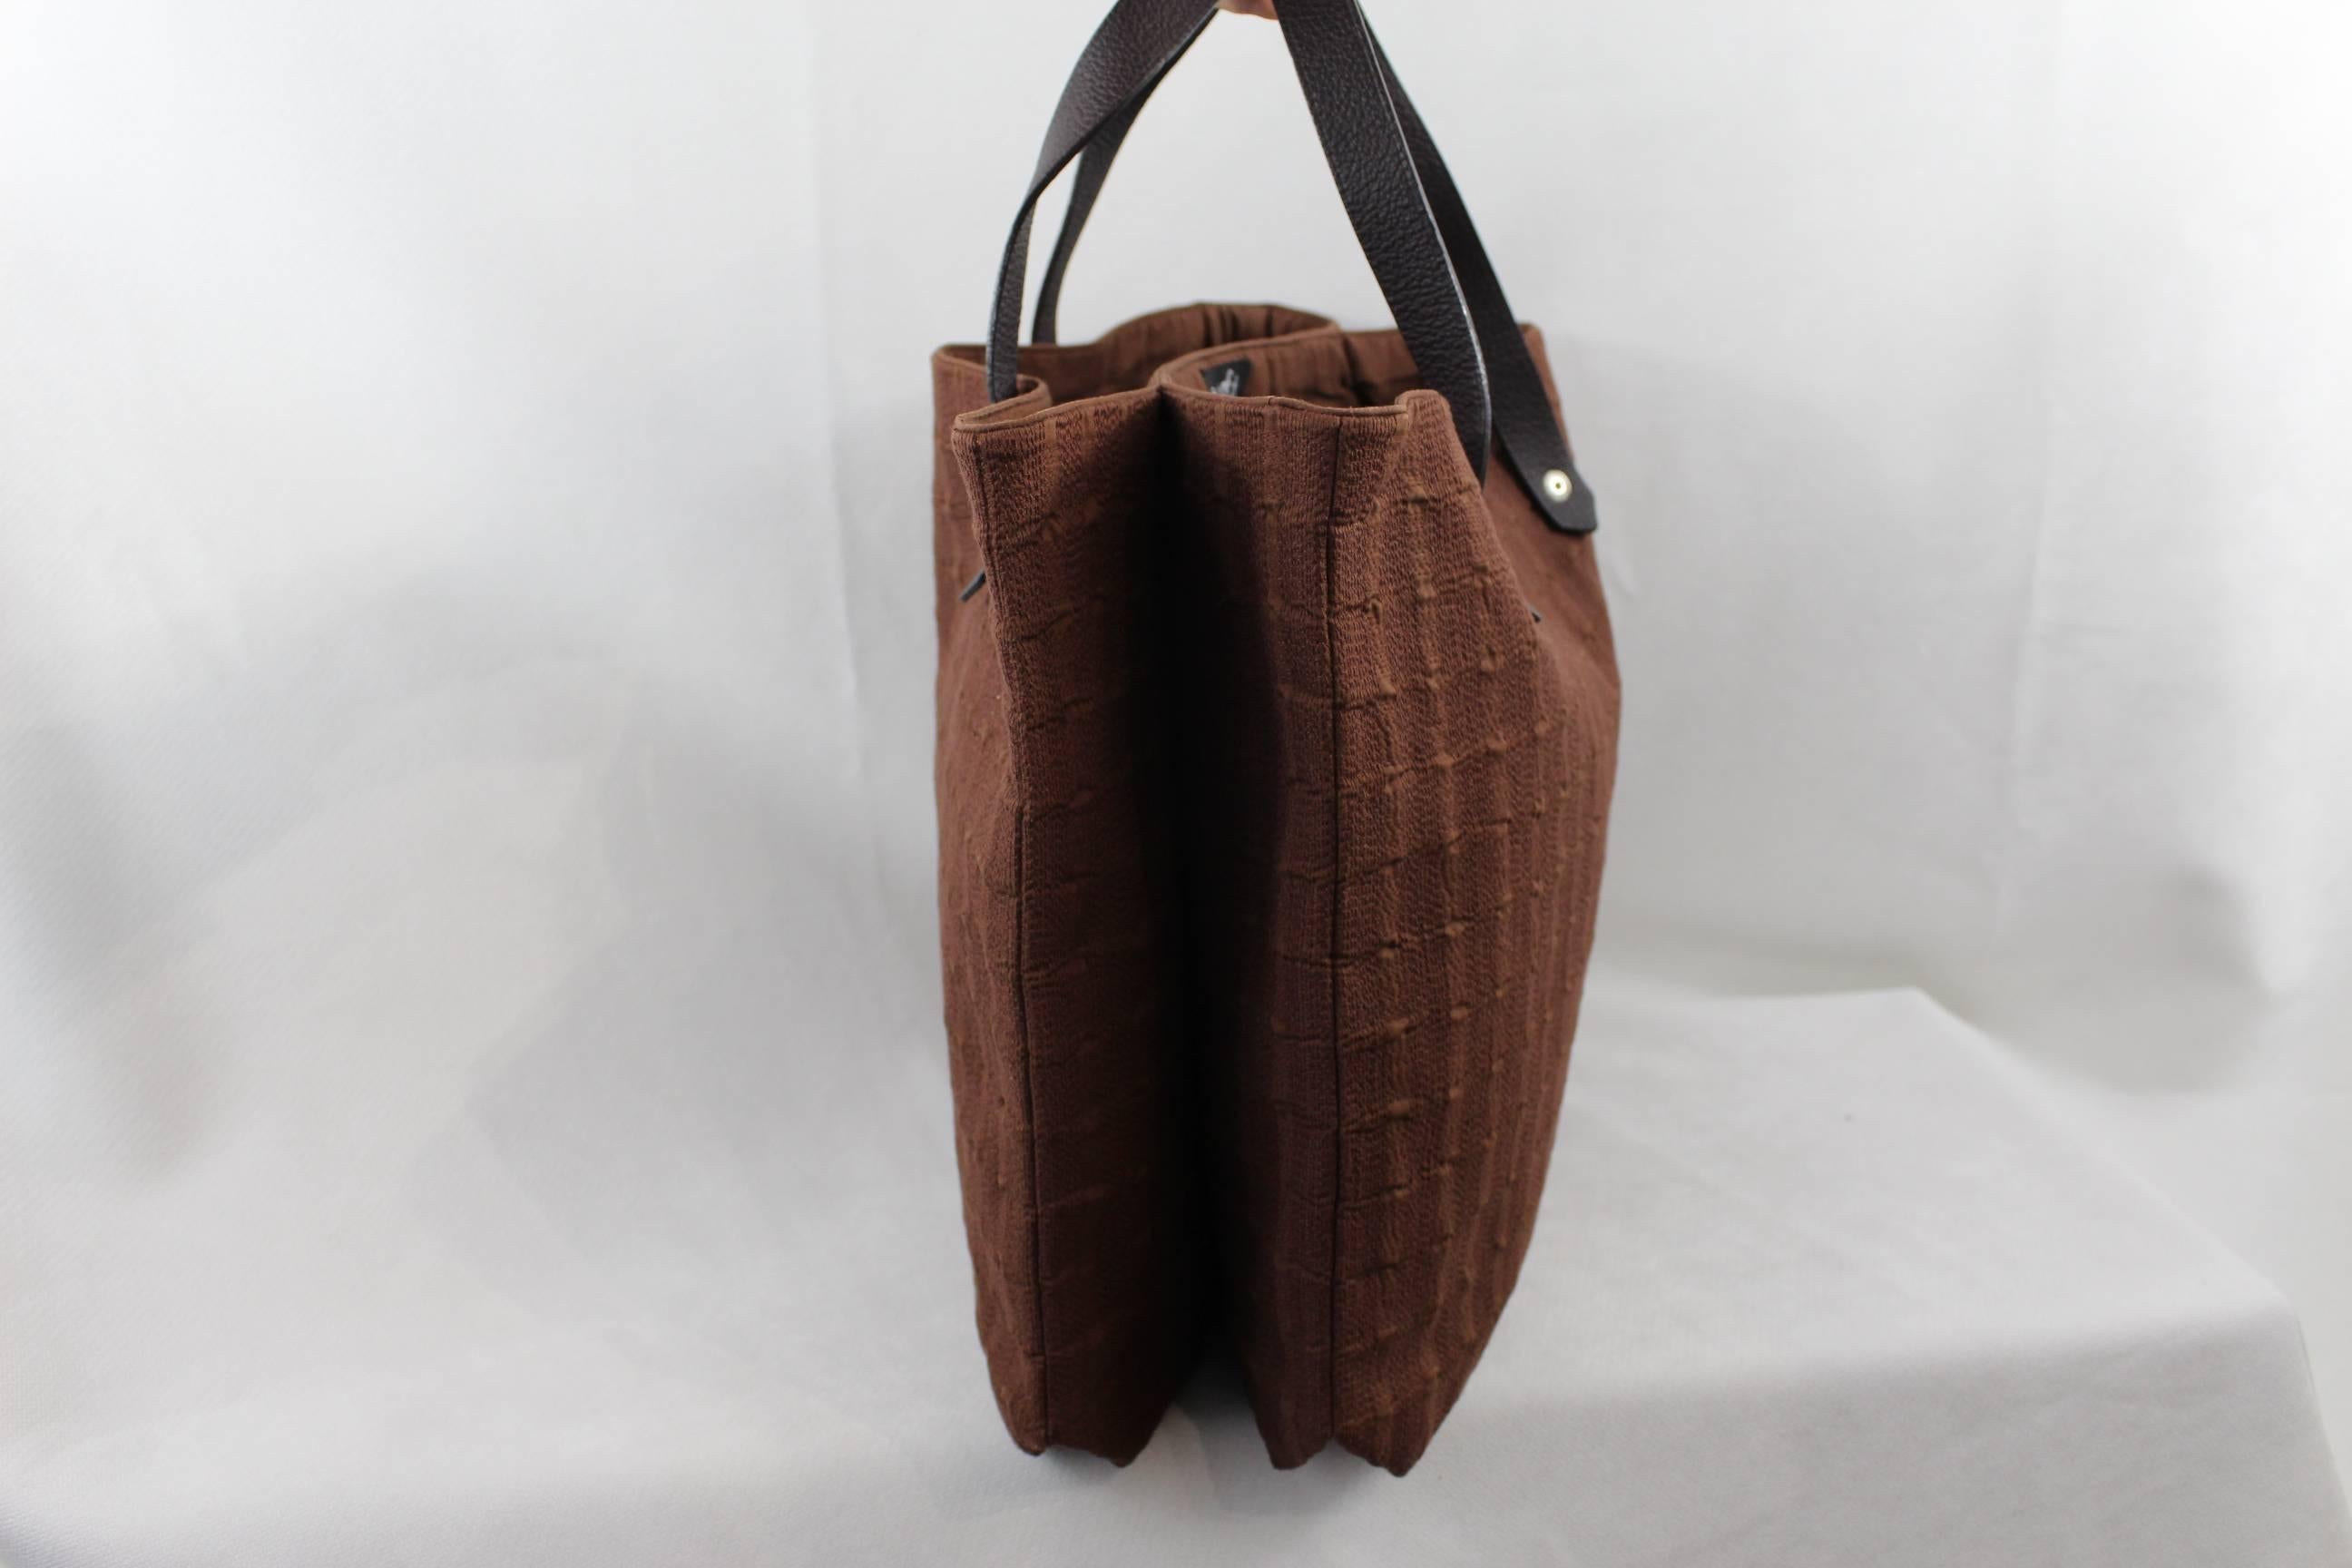 Really nice and in excellent condition Hermes Double Tote Bag in brown color.
Label inside
2 different compatiments
Handles in leather in really good condtion